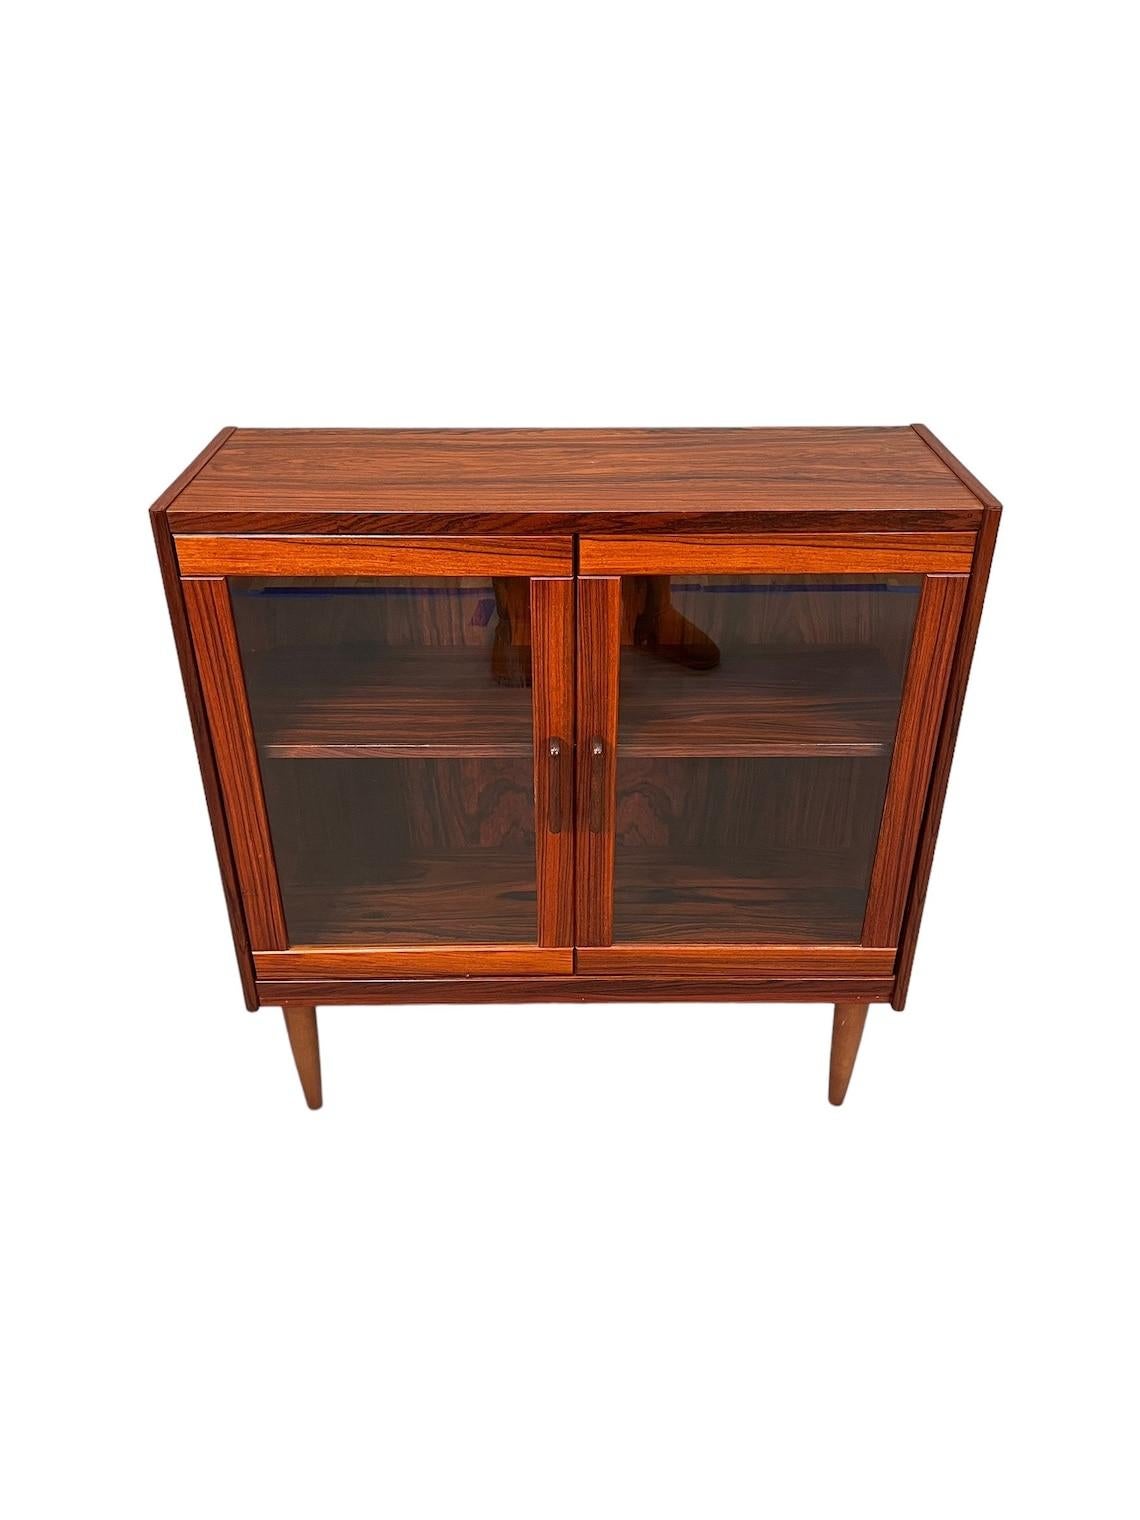 Mid-Century Rosewood glass cabinet 

Dimensions:
L:33 D:12 H:35 inches

Condition:
very good for age and use 